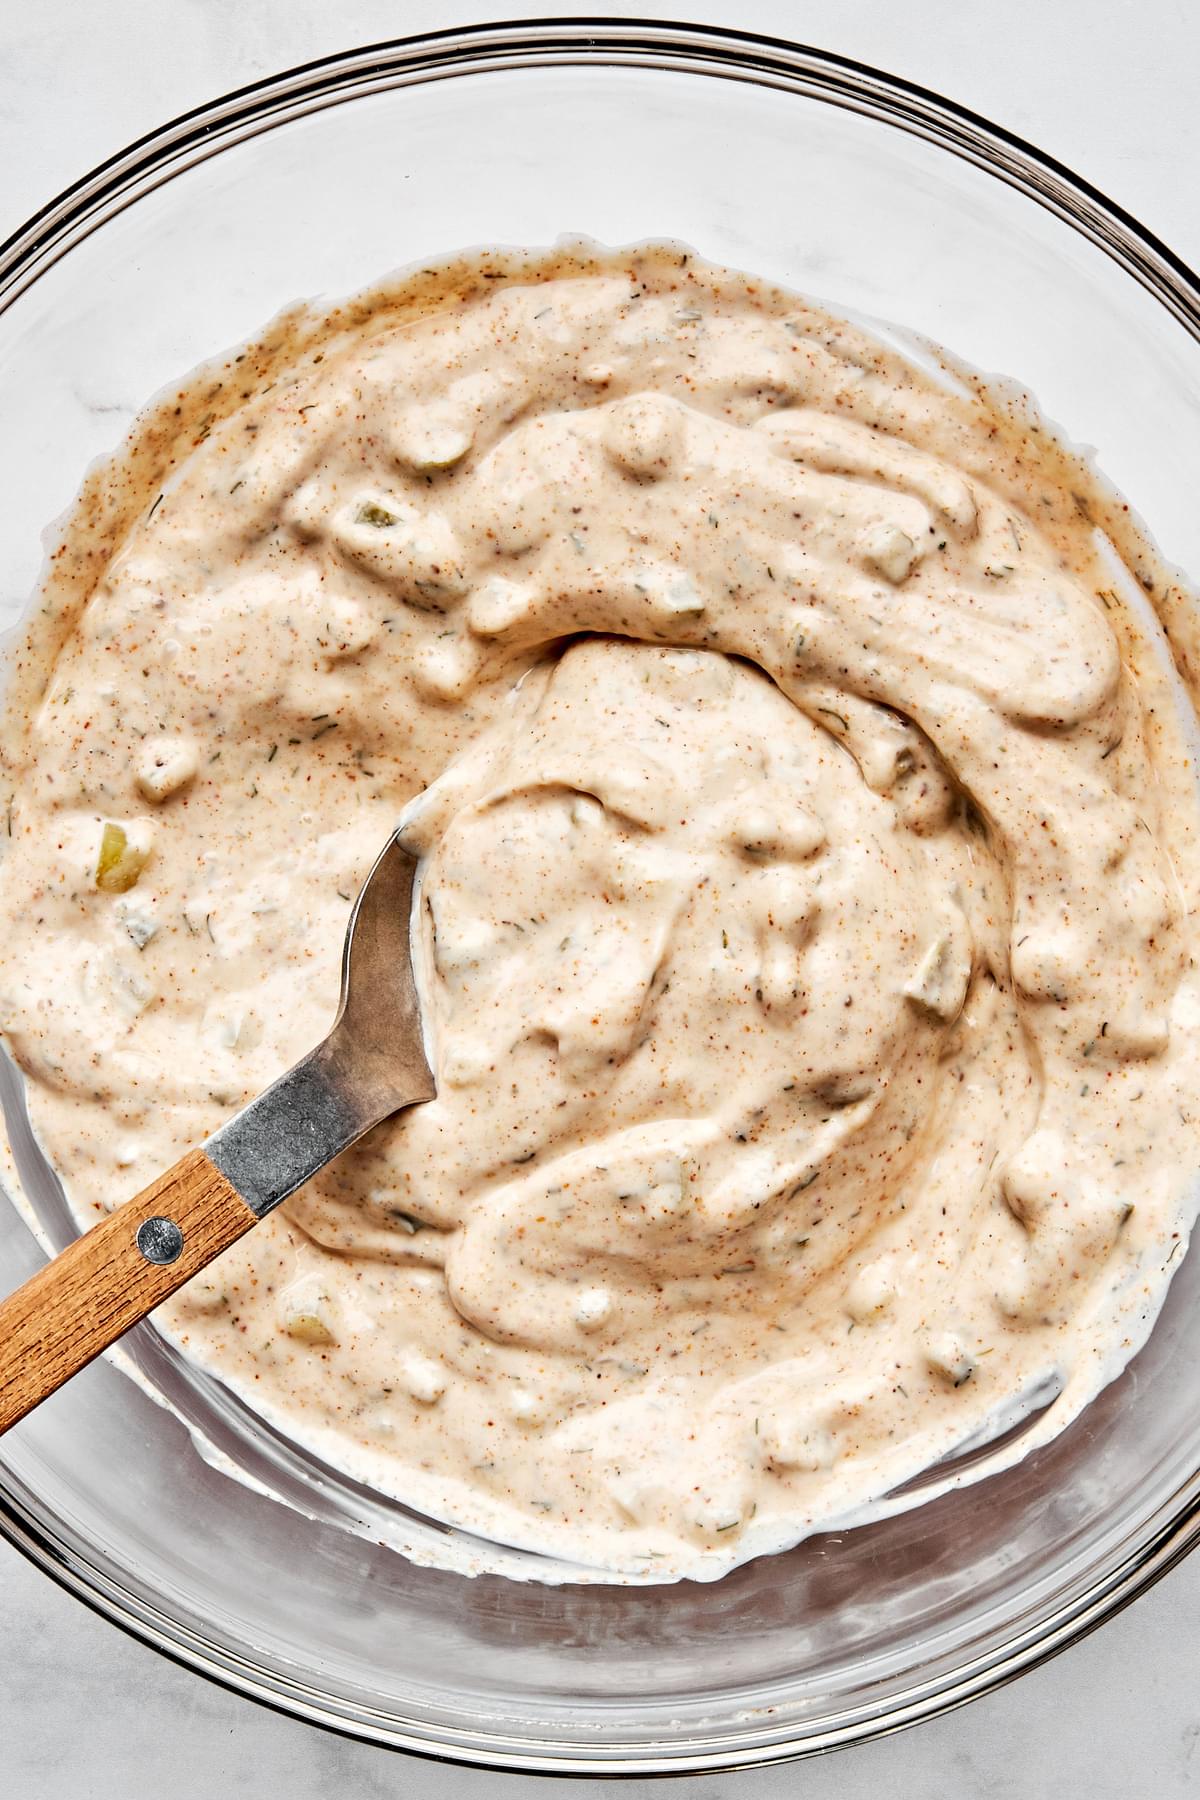 tartar sauce in a bowl made with mayo, pickles, lemon juice, sugar and spices